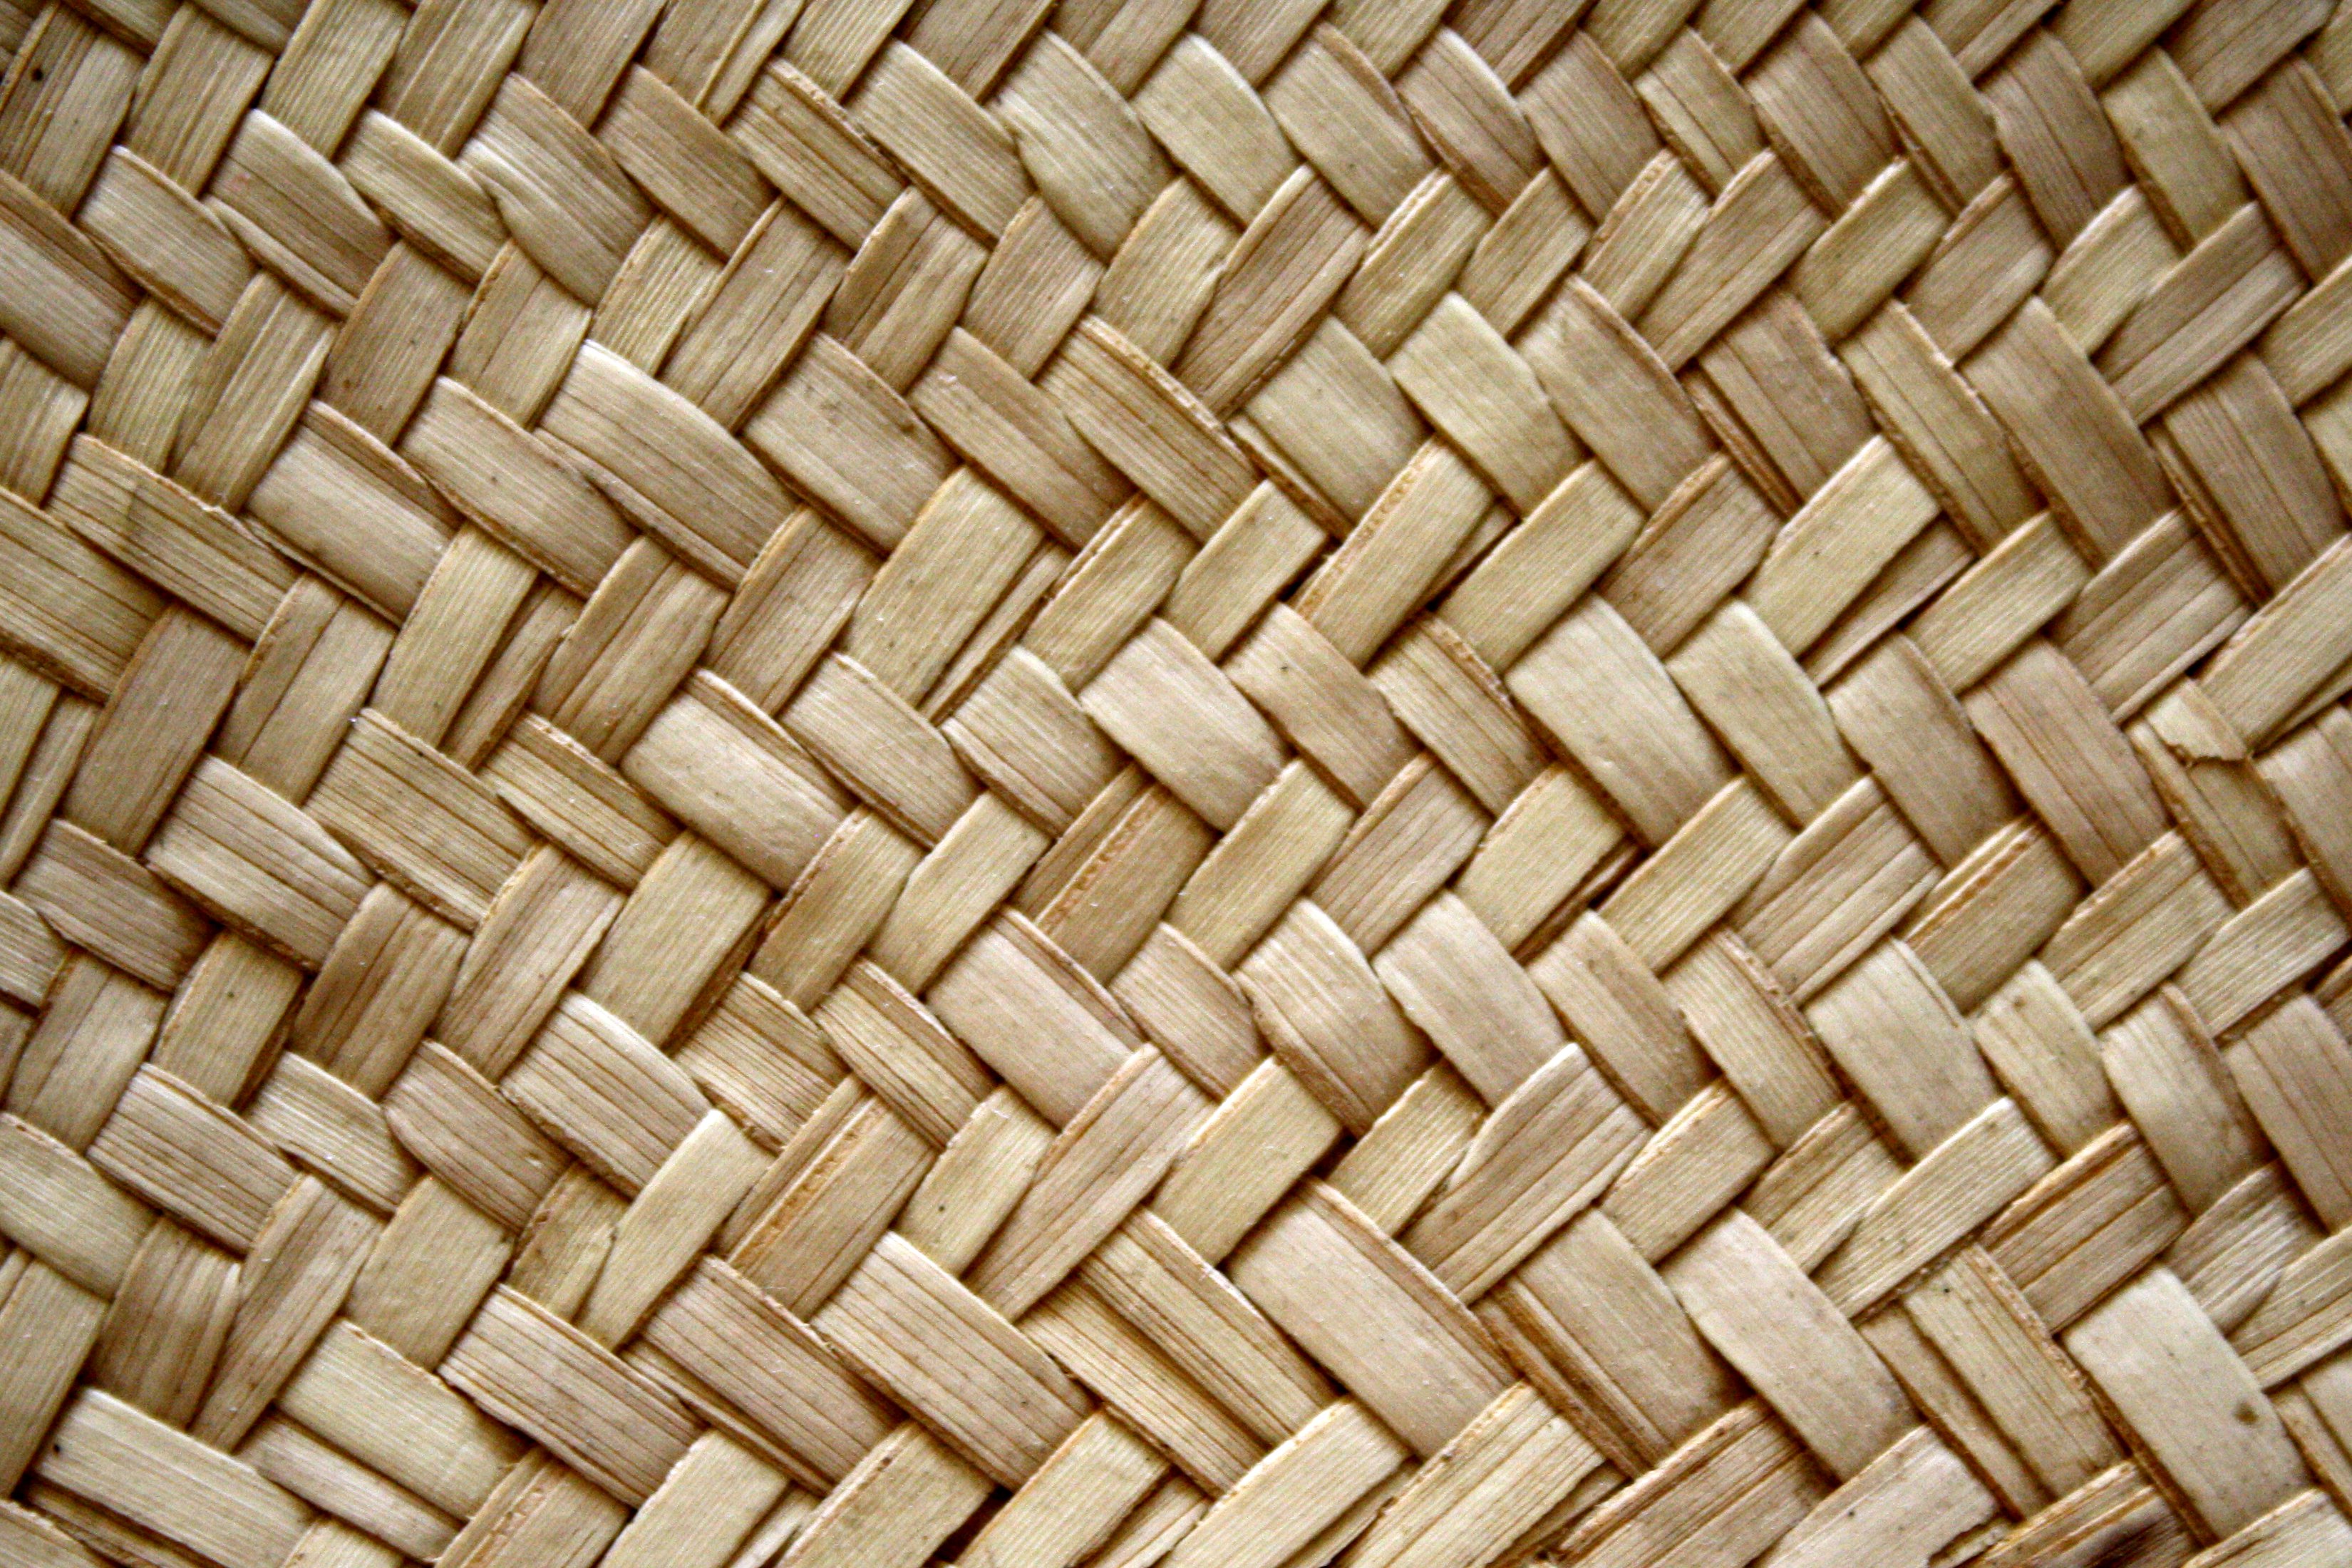 Woven Straw Texture Picture | Free Photograph | Photos Public Domain